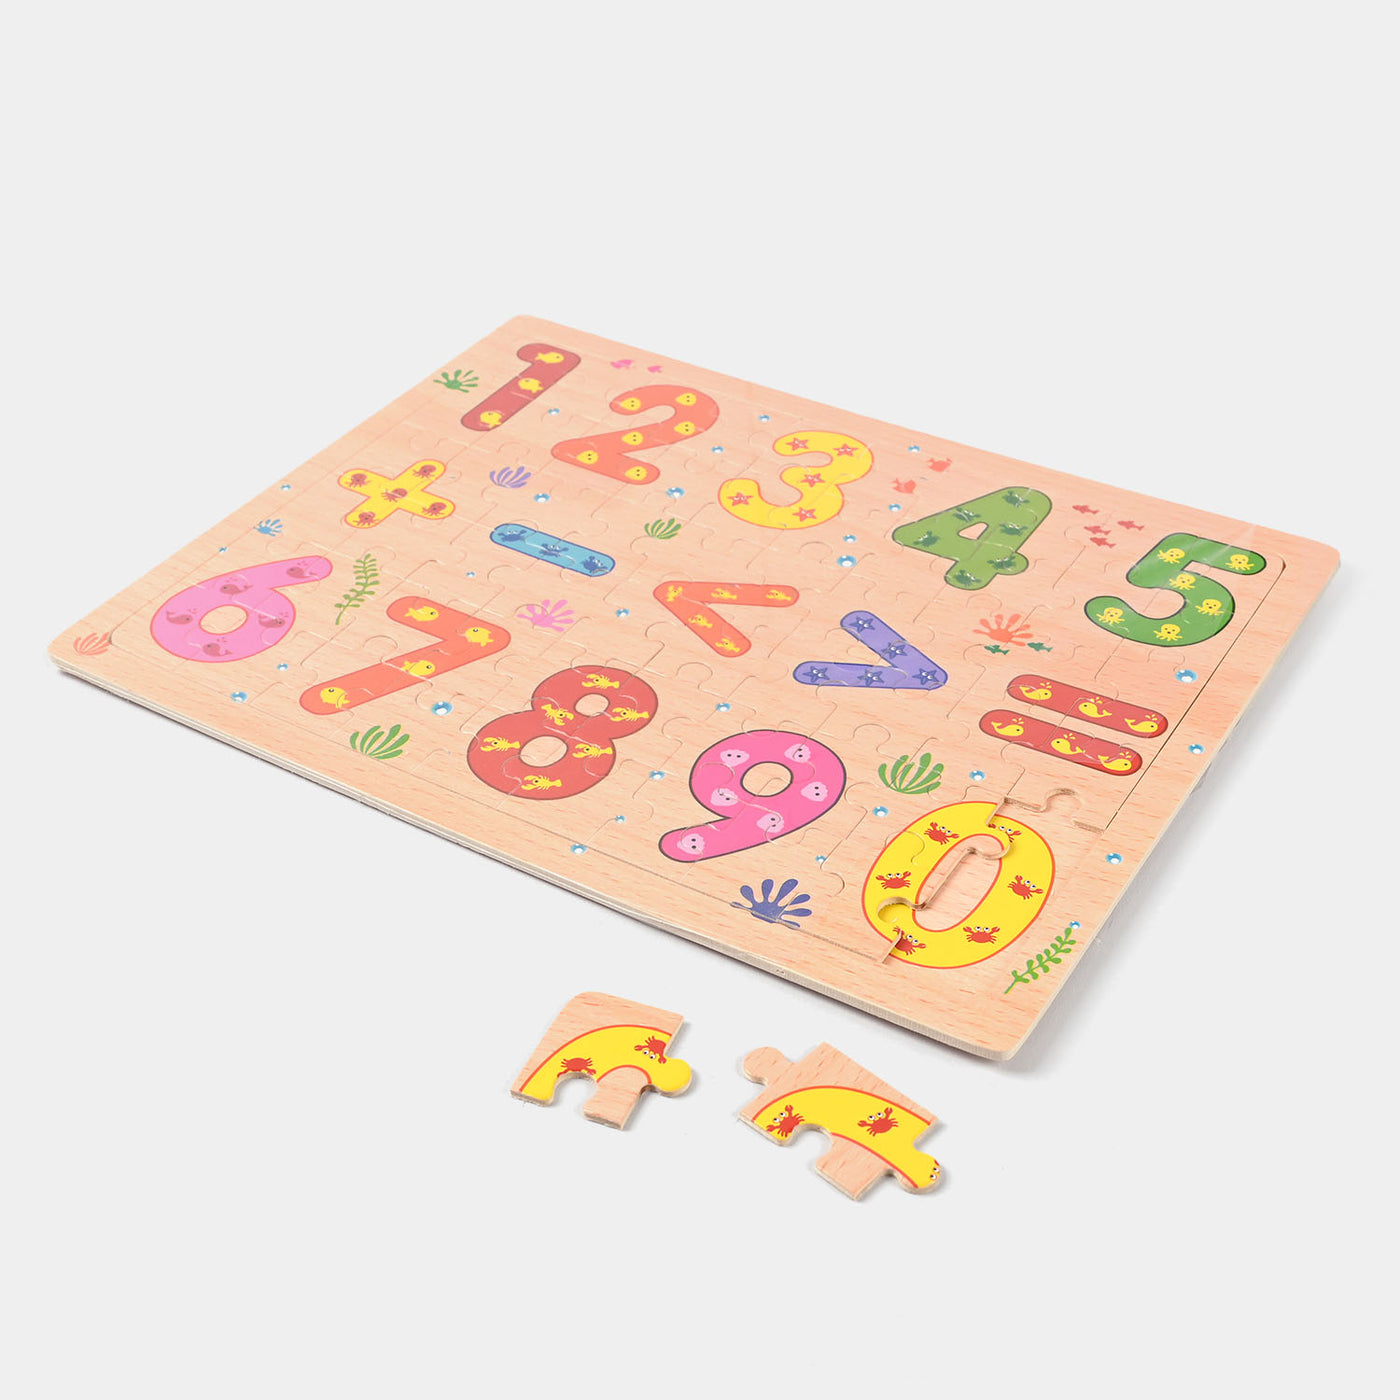 Wooden Puzzle Game Board For Kids